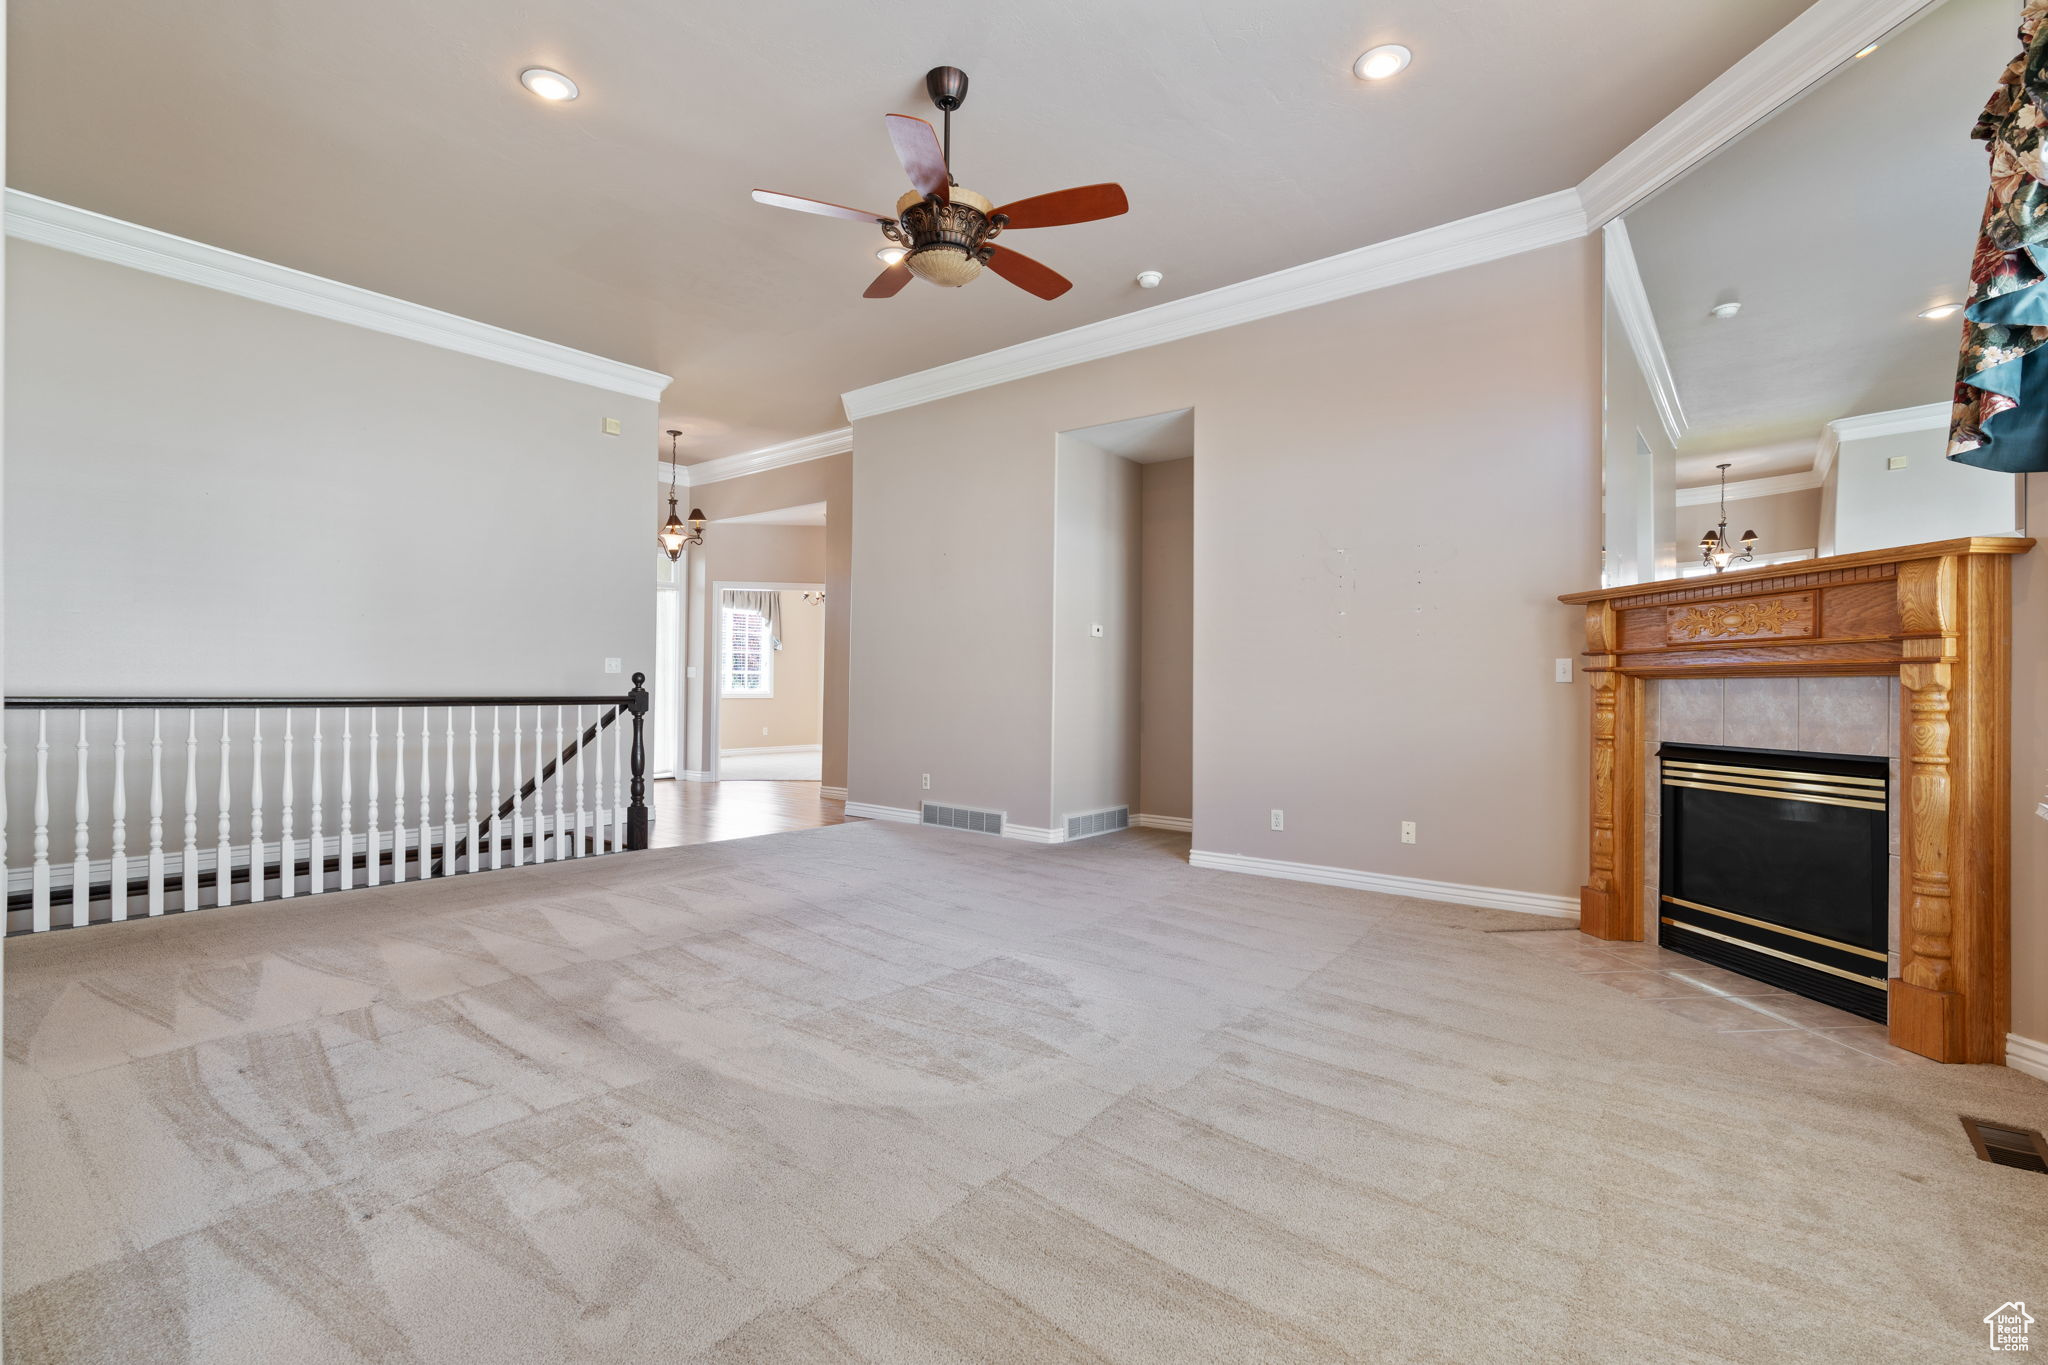 Unfurnished living room with ceiling fan, crown molding, a tile fireplace, and carpet floors